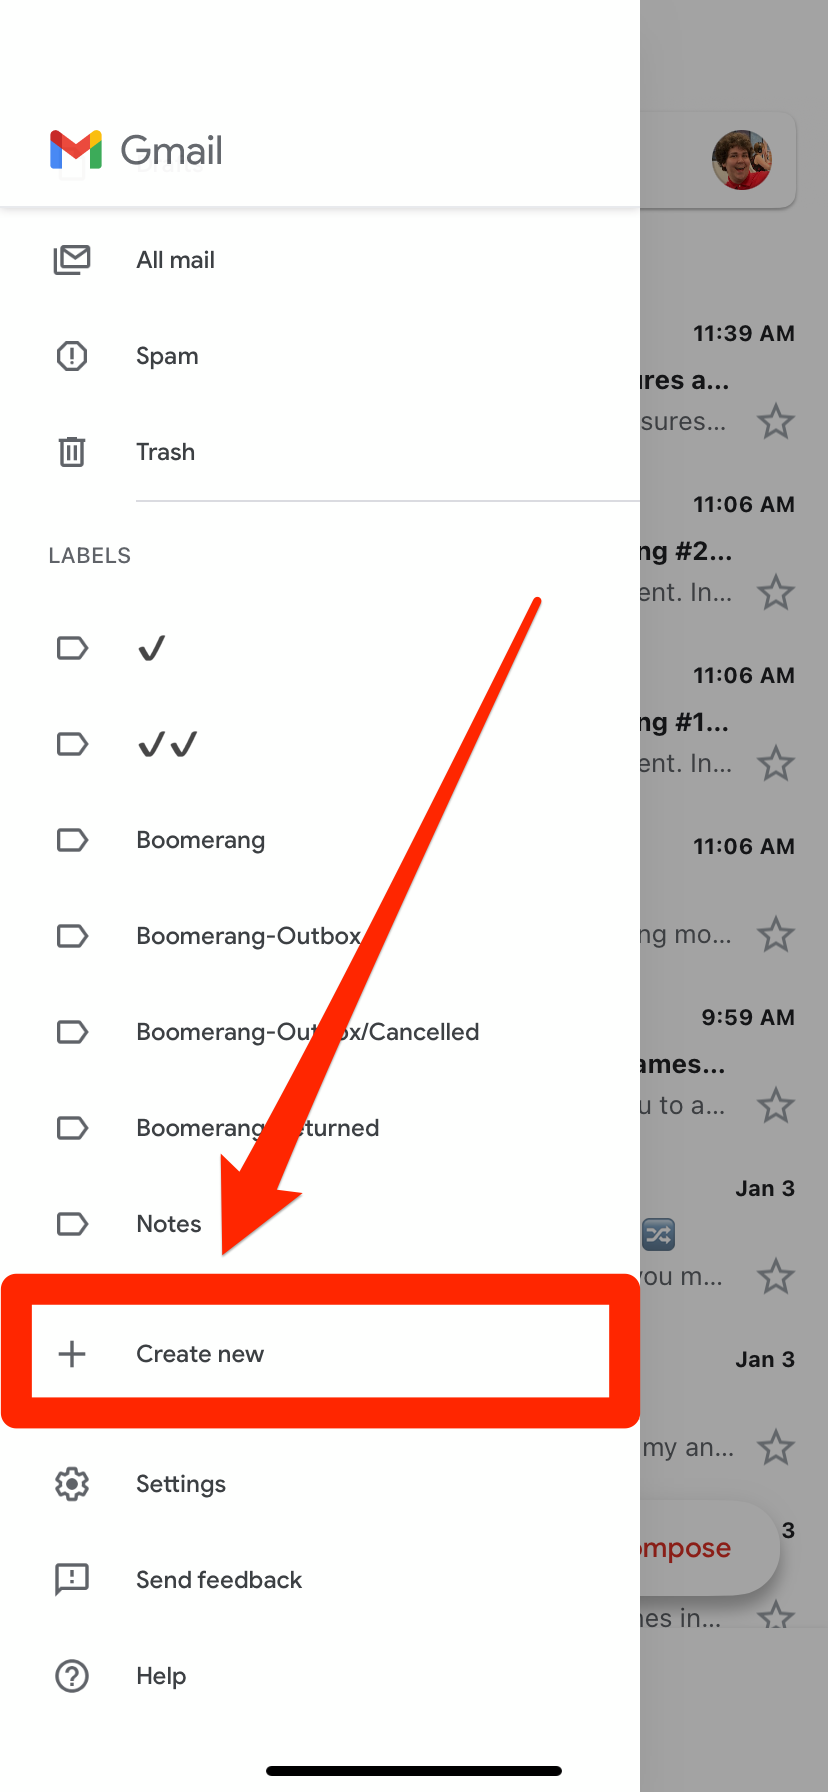 The "Create new" option in Gmail's iPhone app that lets you make a new label.